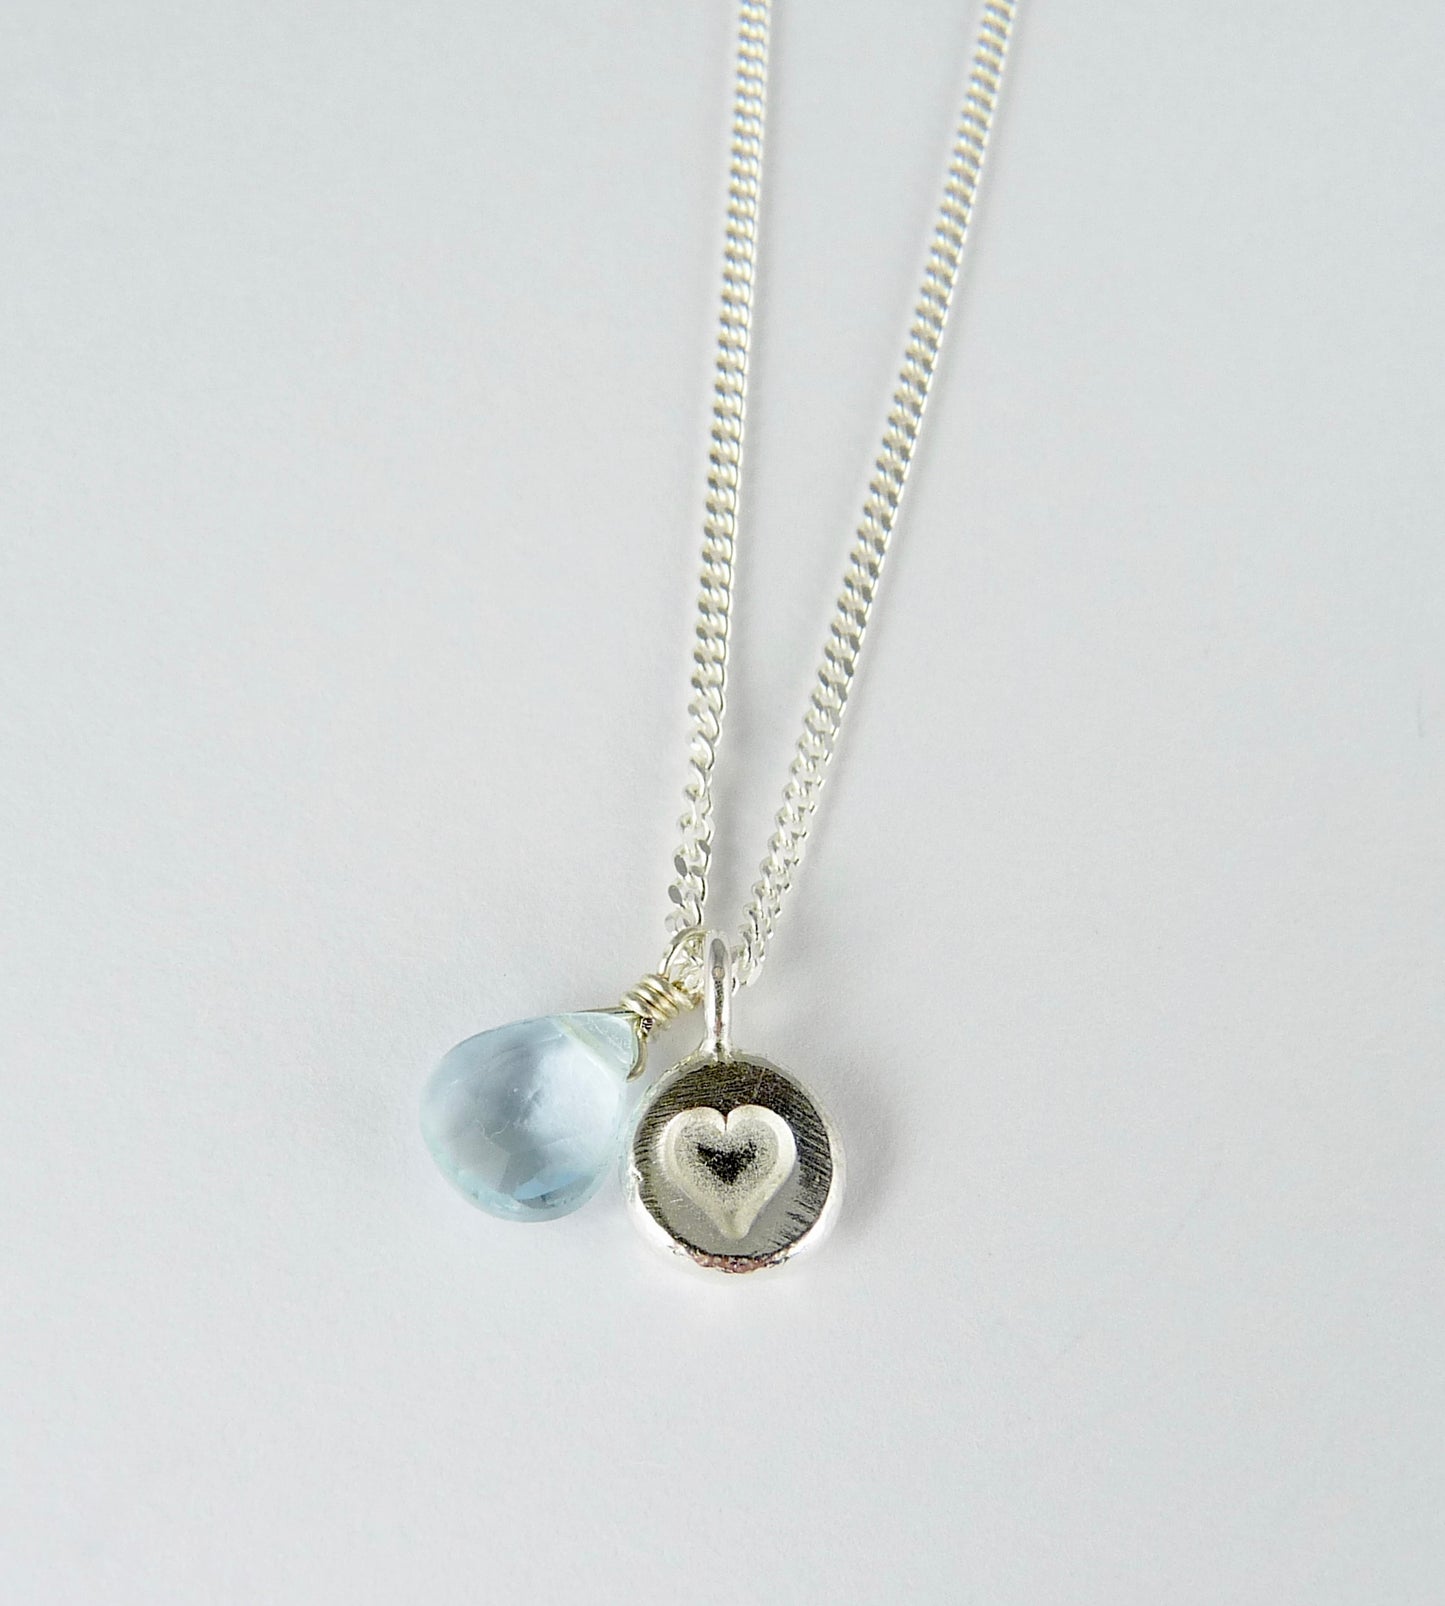 Silver Stamped Heart and Gemstone Necklace